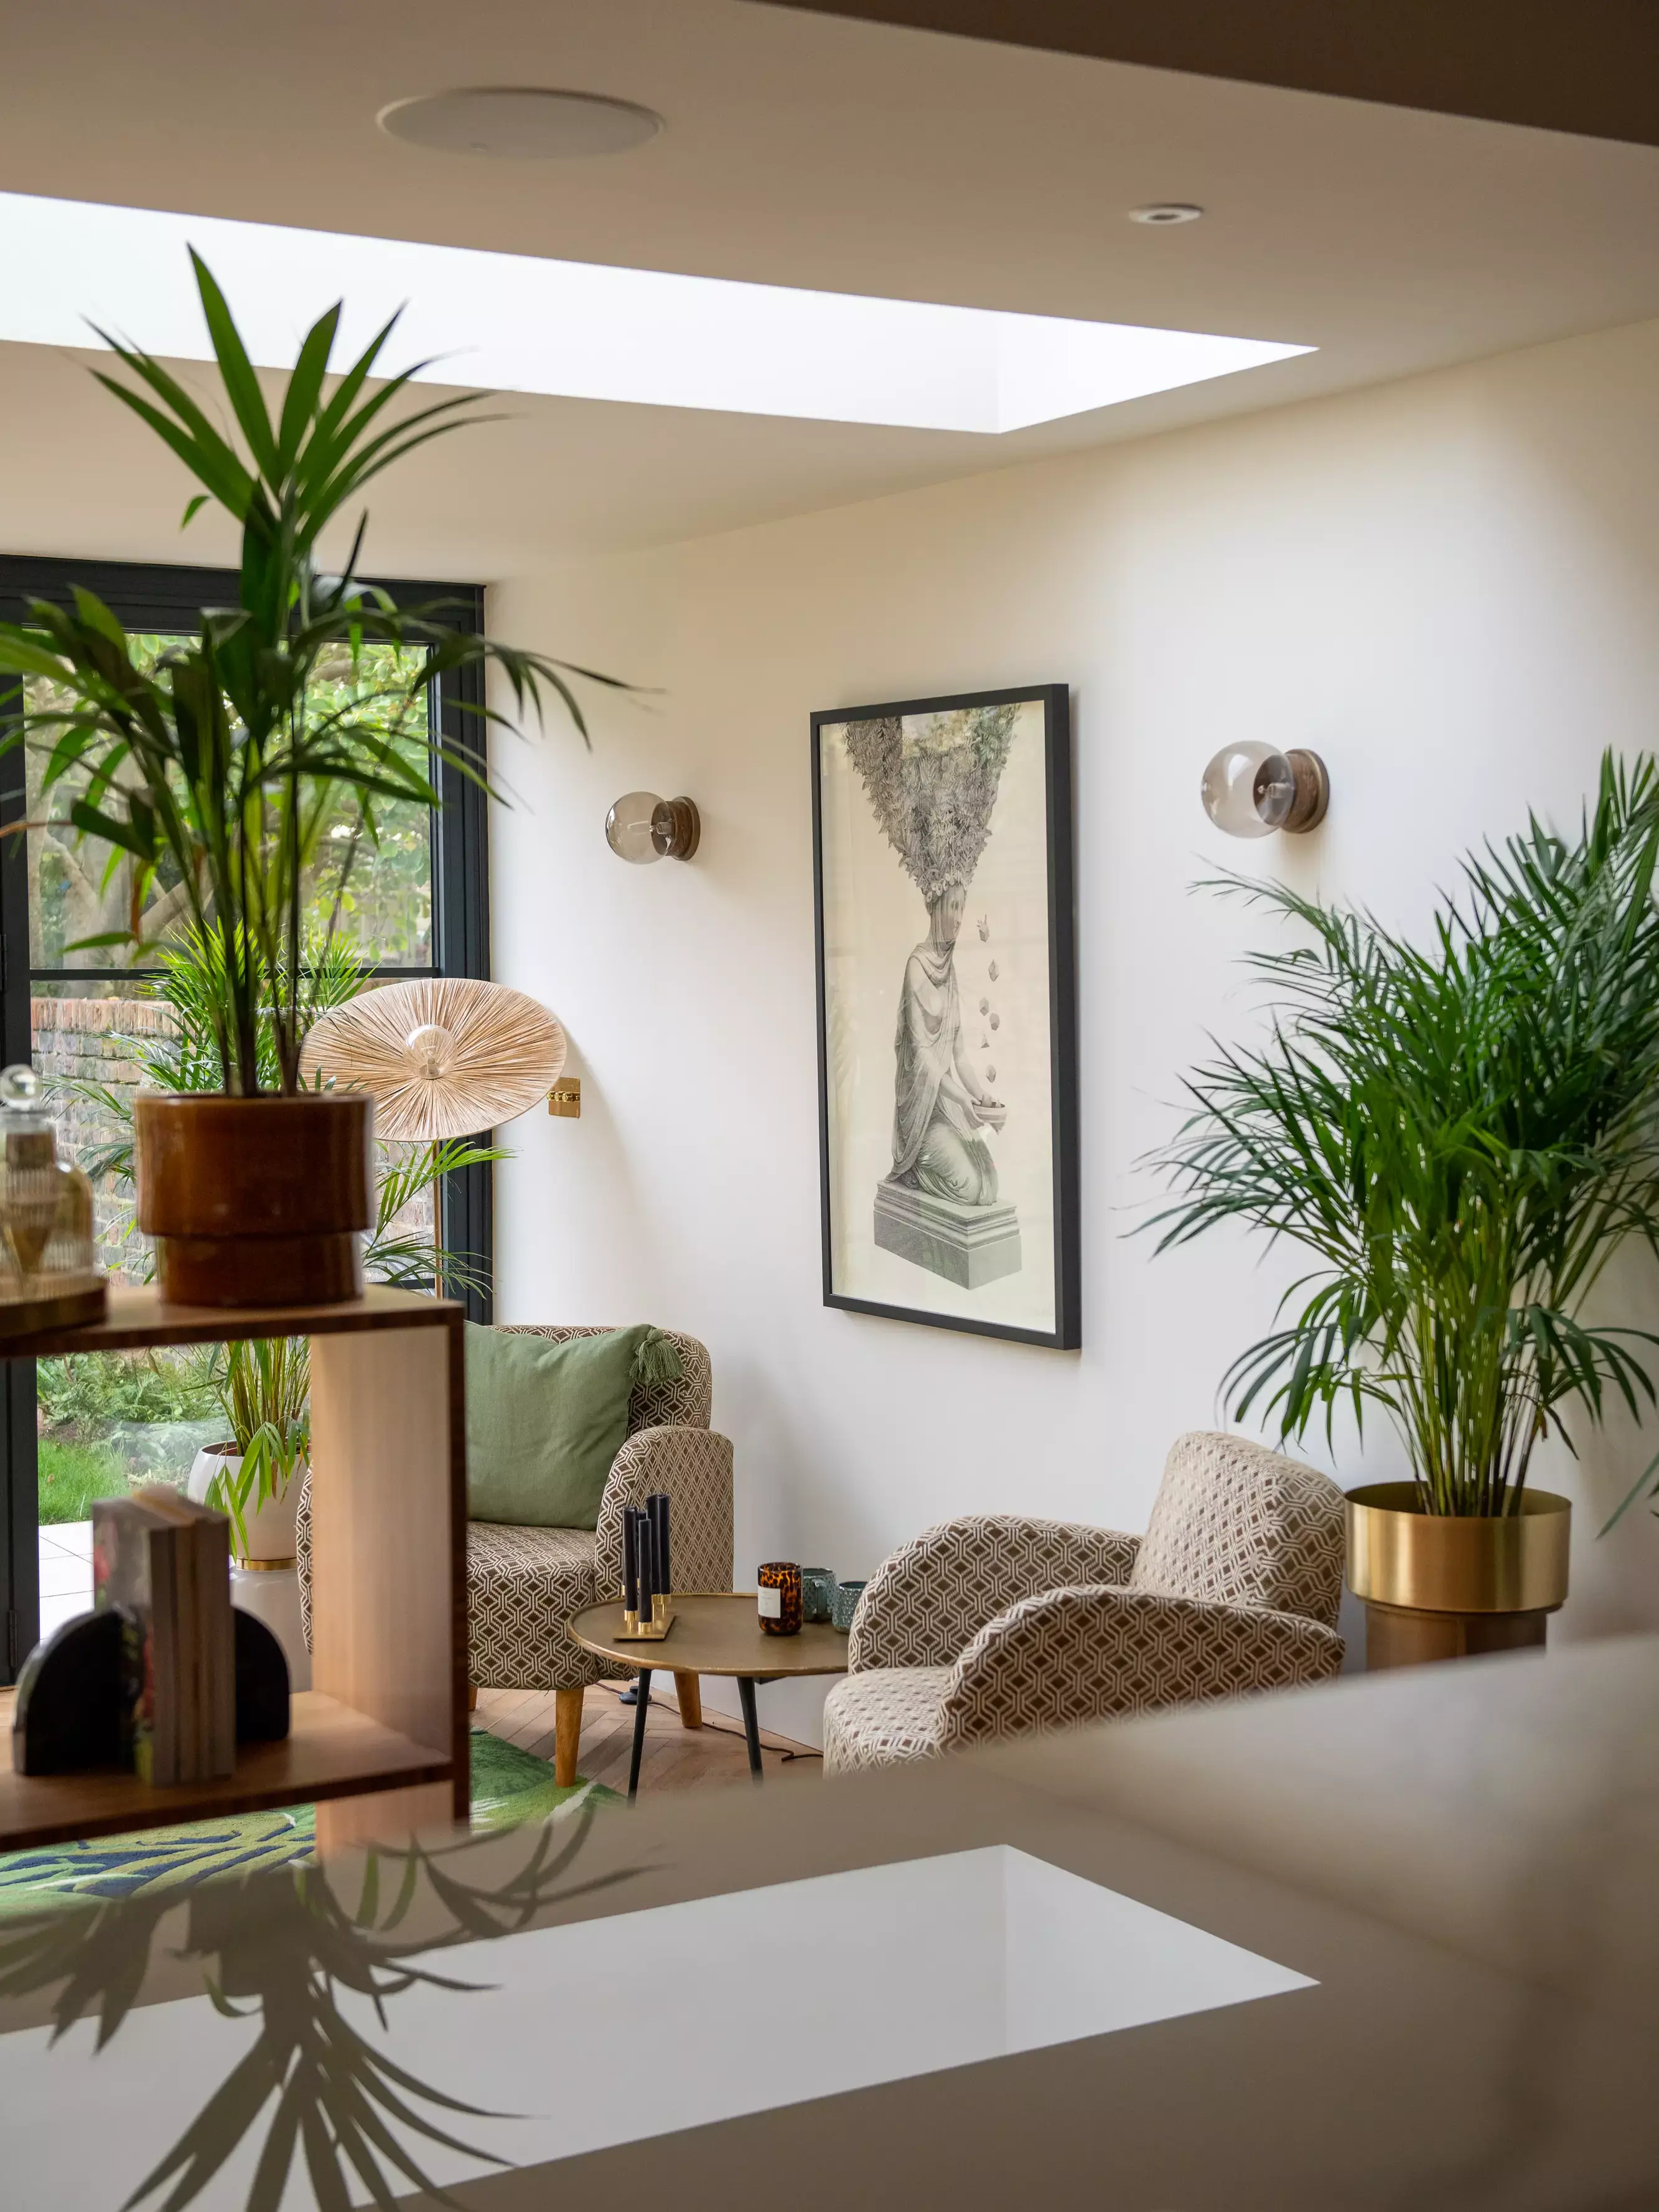 Modern living room with natural light from VELUX roof window, plants, and stylish decor.